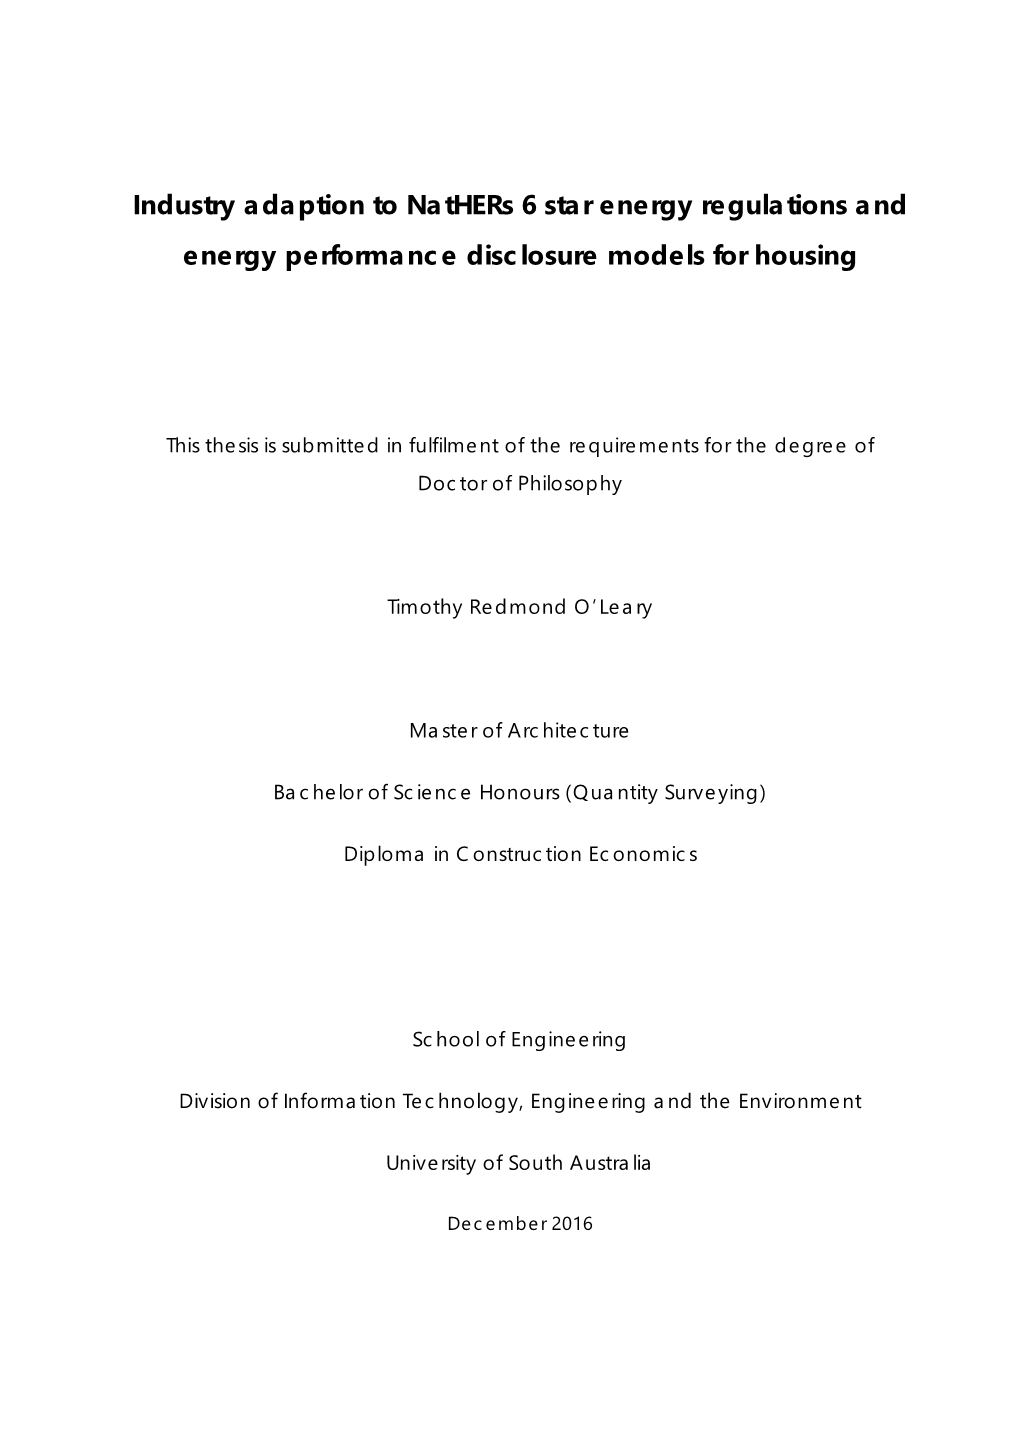 Industry Adaption to Nathers 6 Star Energy Regulations and Energy Performance Disclosure Models for Housing